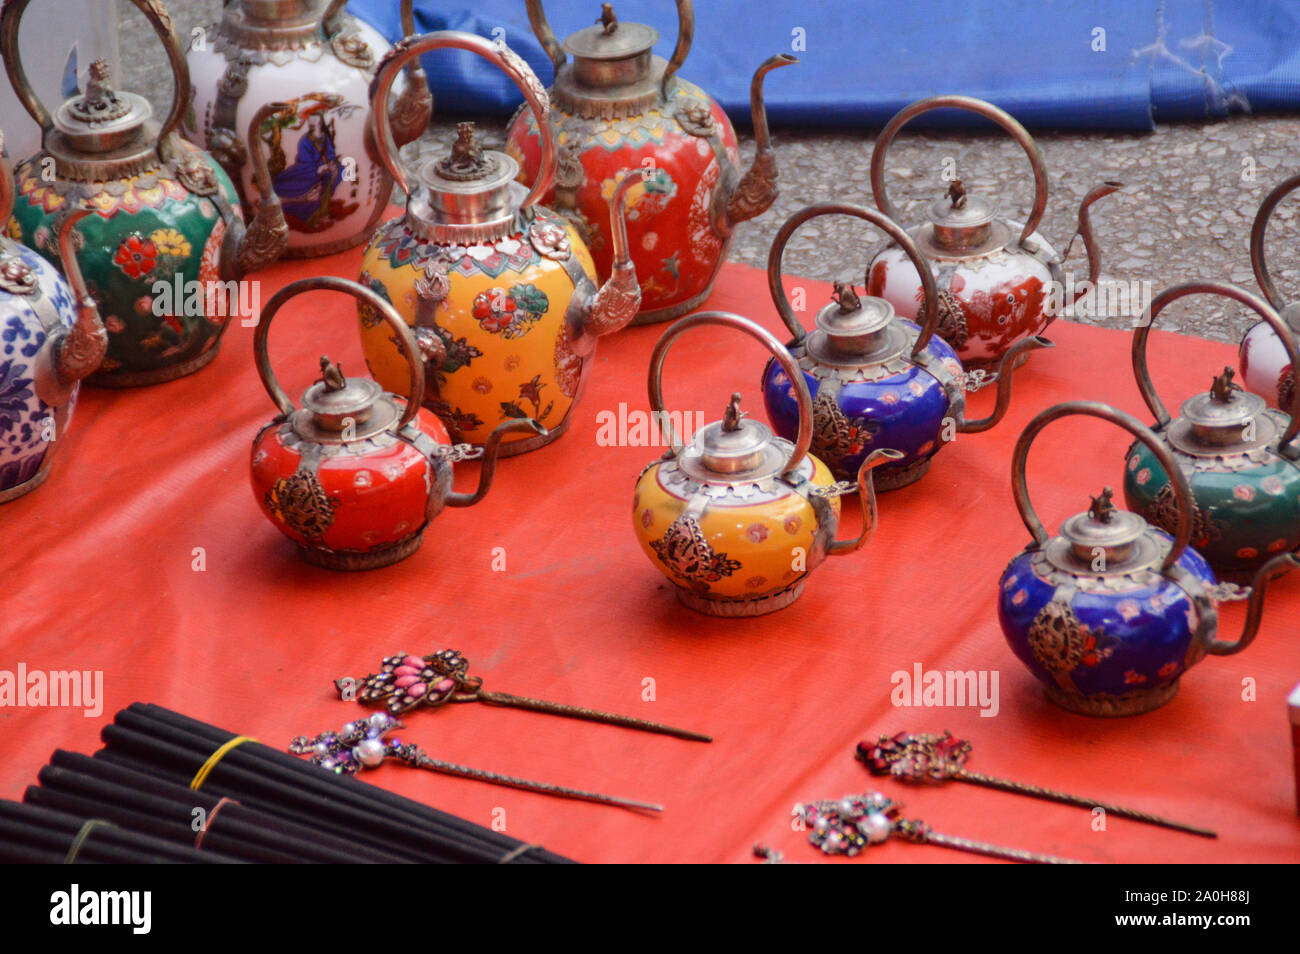 Beautiful hand-crafted porcelain teapots sold as souvenirs in the local market of Luang Prabang, Laos Stock Photo